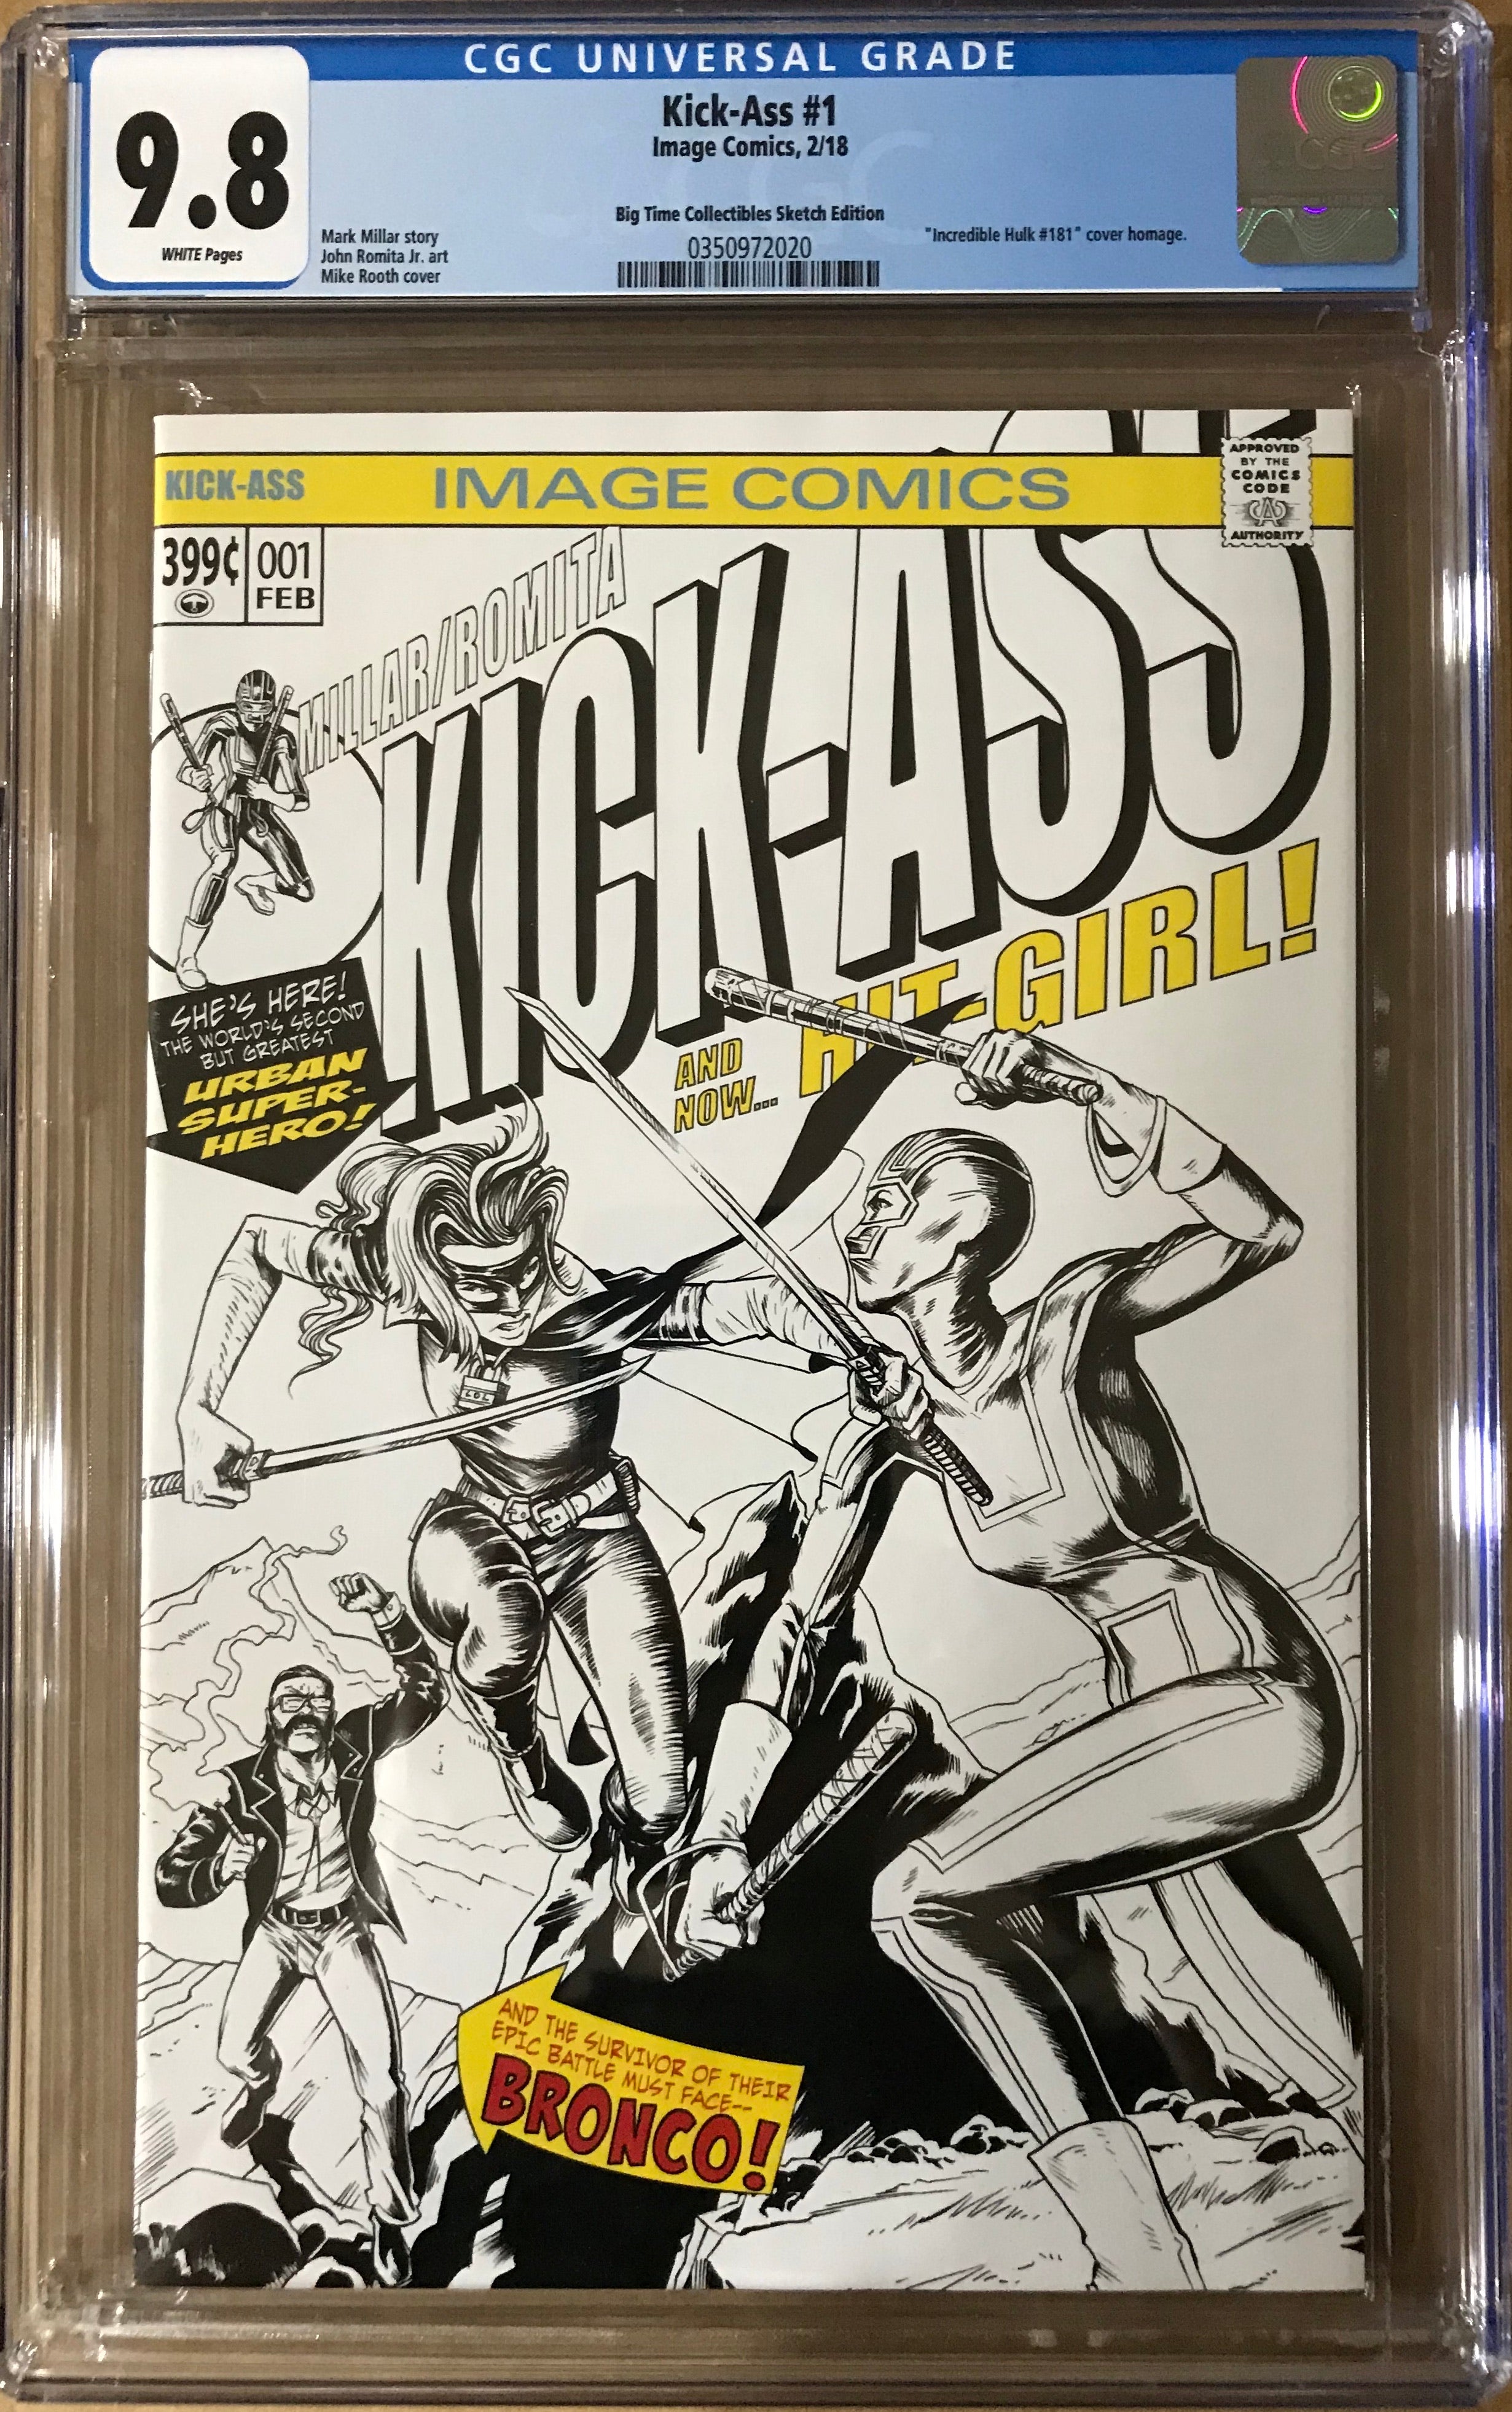 KICK-ASS #1 MIKE ROOTH B/W EXCLUSIVE COVERS CGC 9.8 BLUE LABEL HULK#18